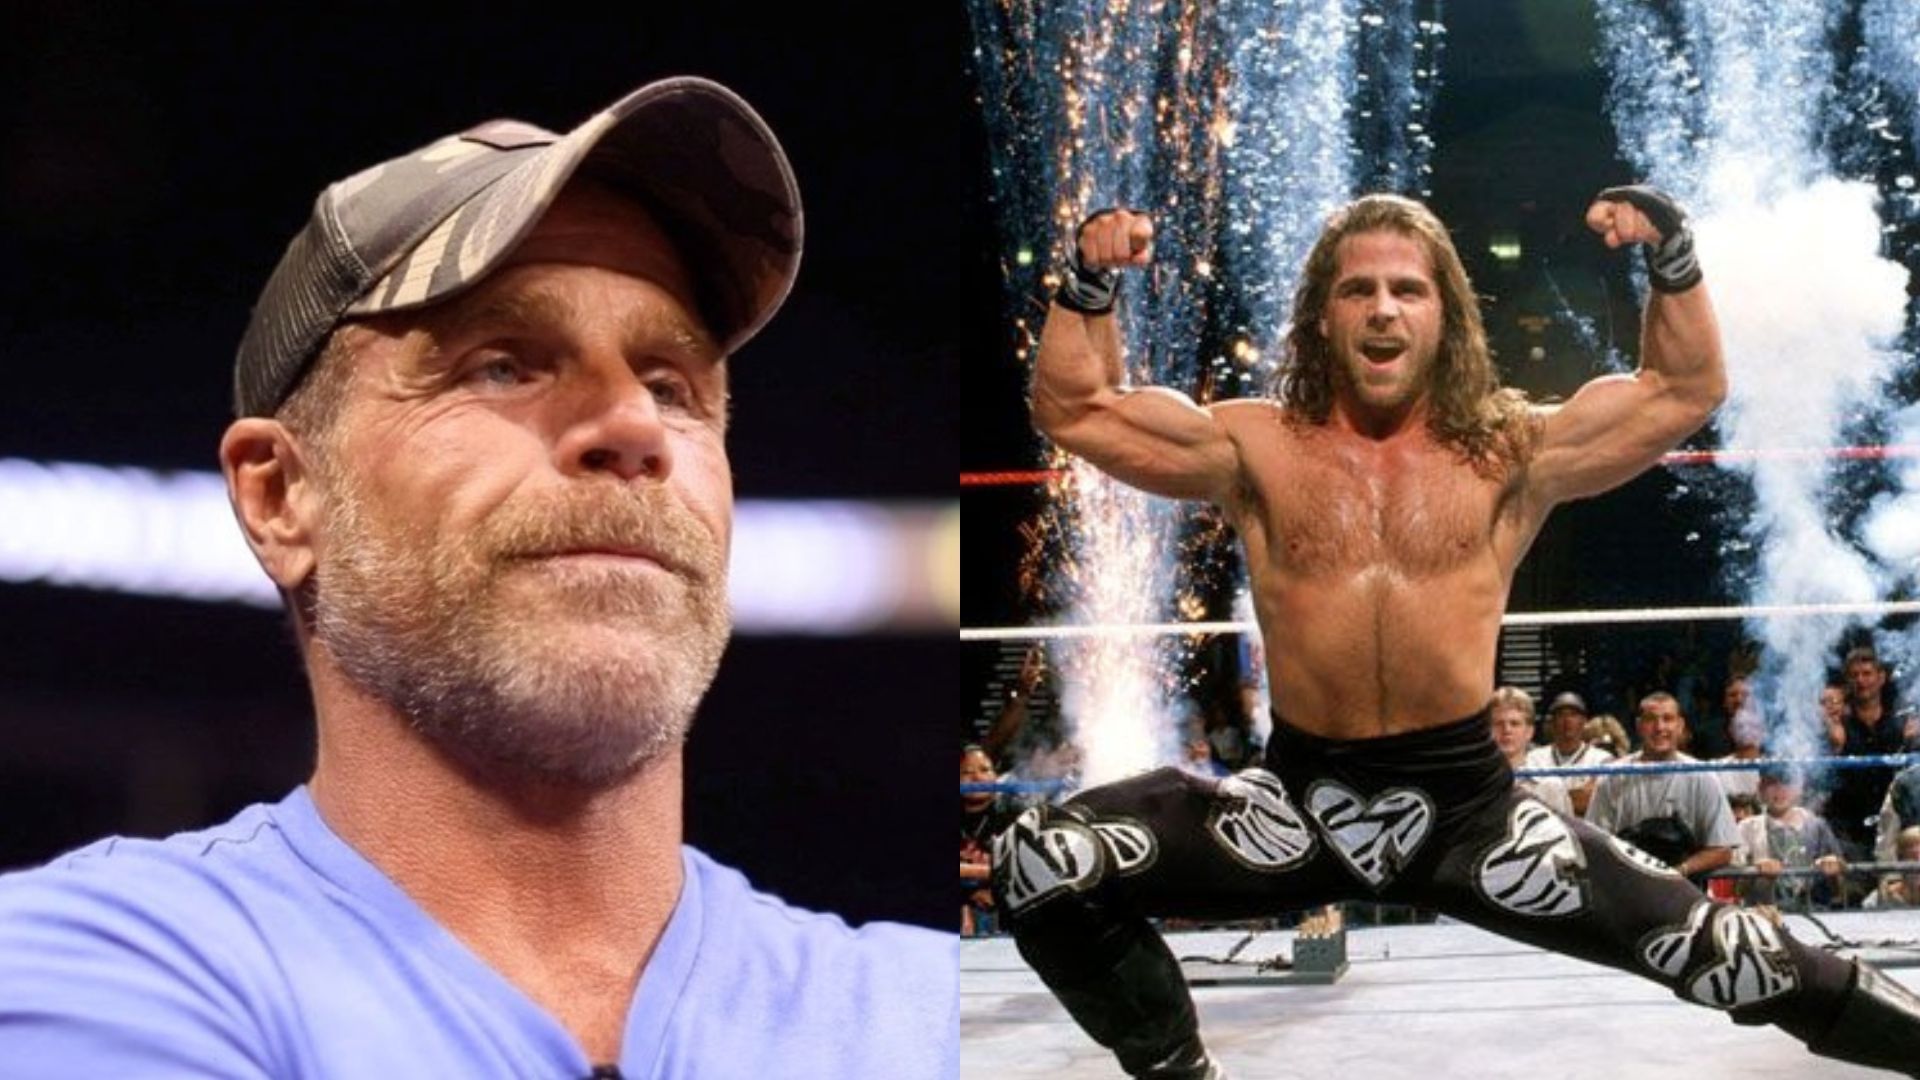 Shawn Michaels was one of the best in-ring performers of all time